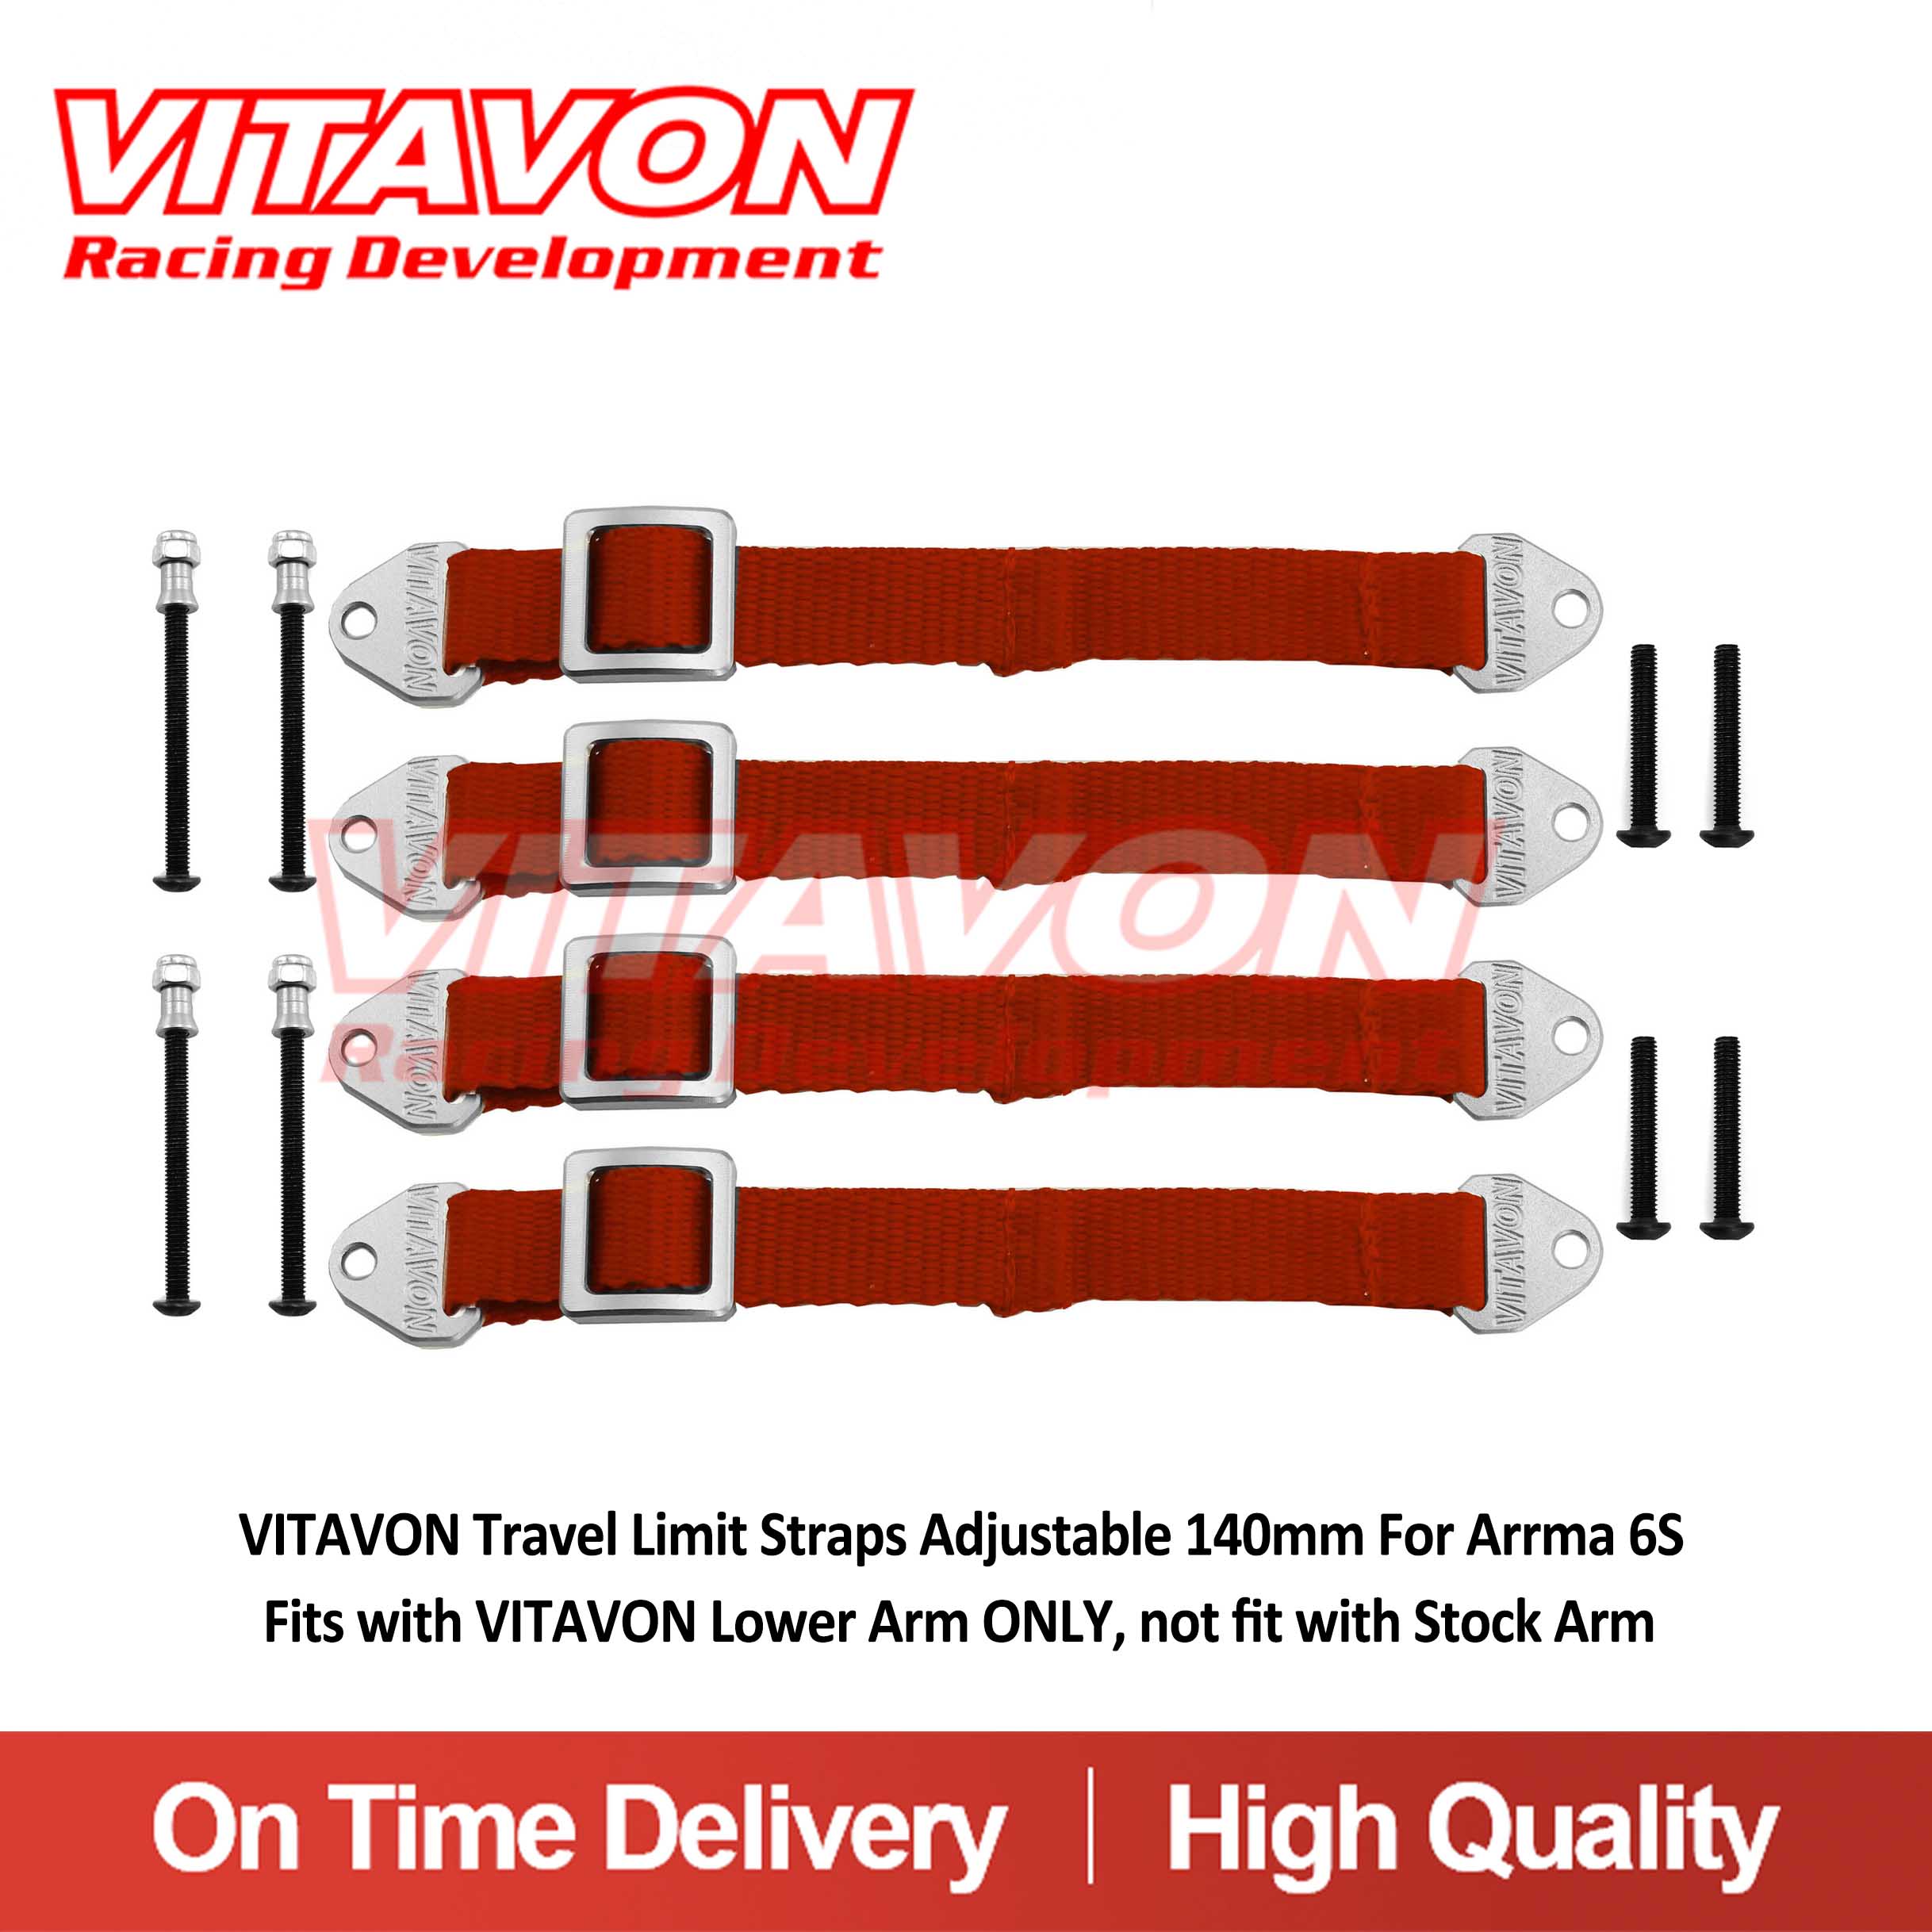 VITAVON Travel Limit Straps Adjustable 140mm For Arrma 6S   Fits with VITAVON Lower Arm ONLY, not fit with Stock Arm